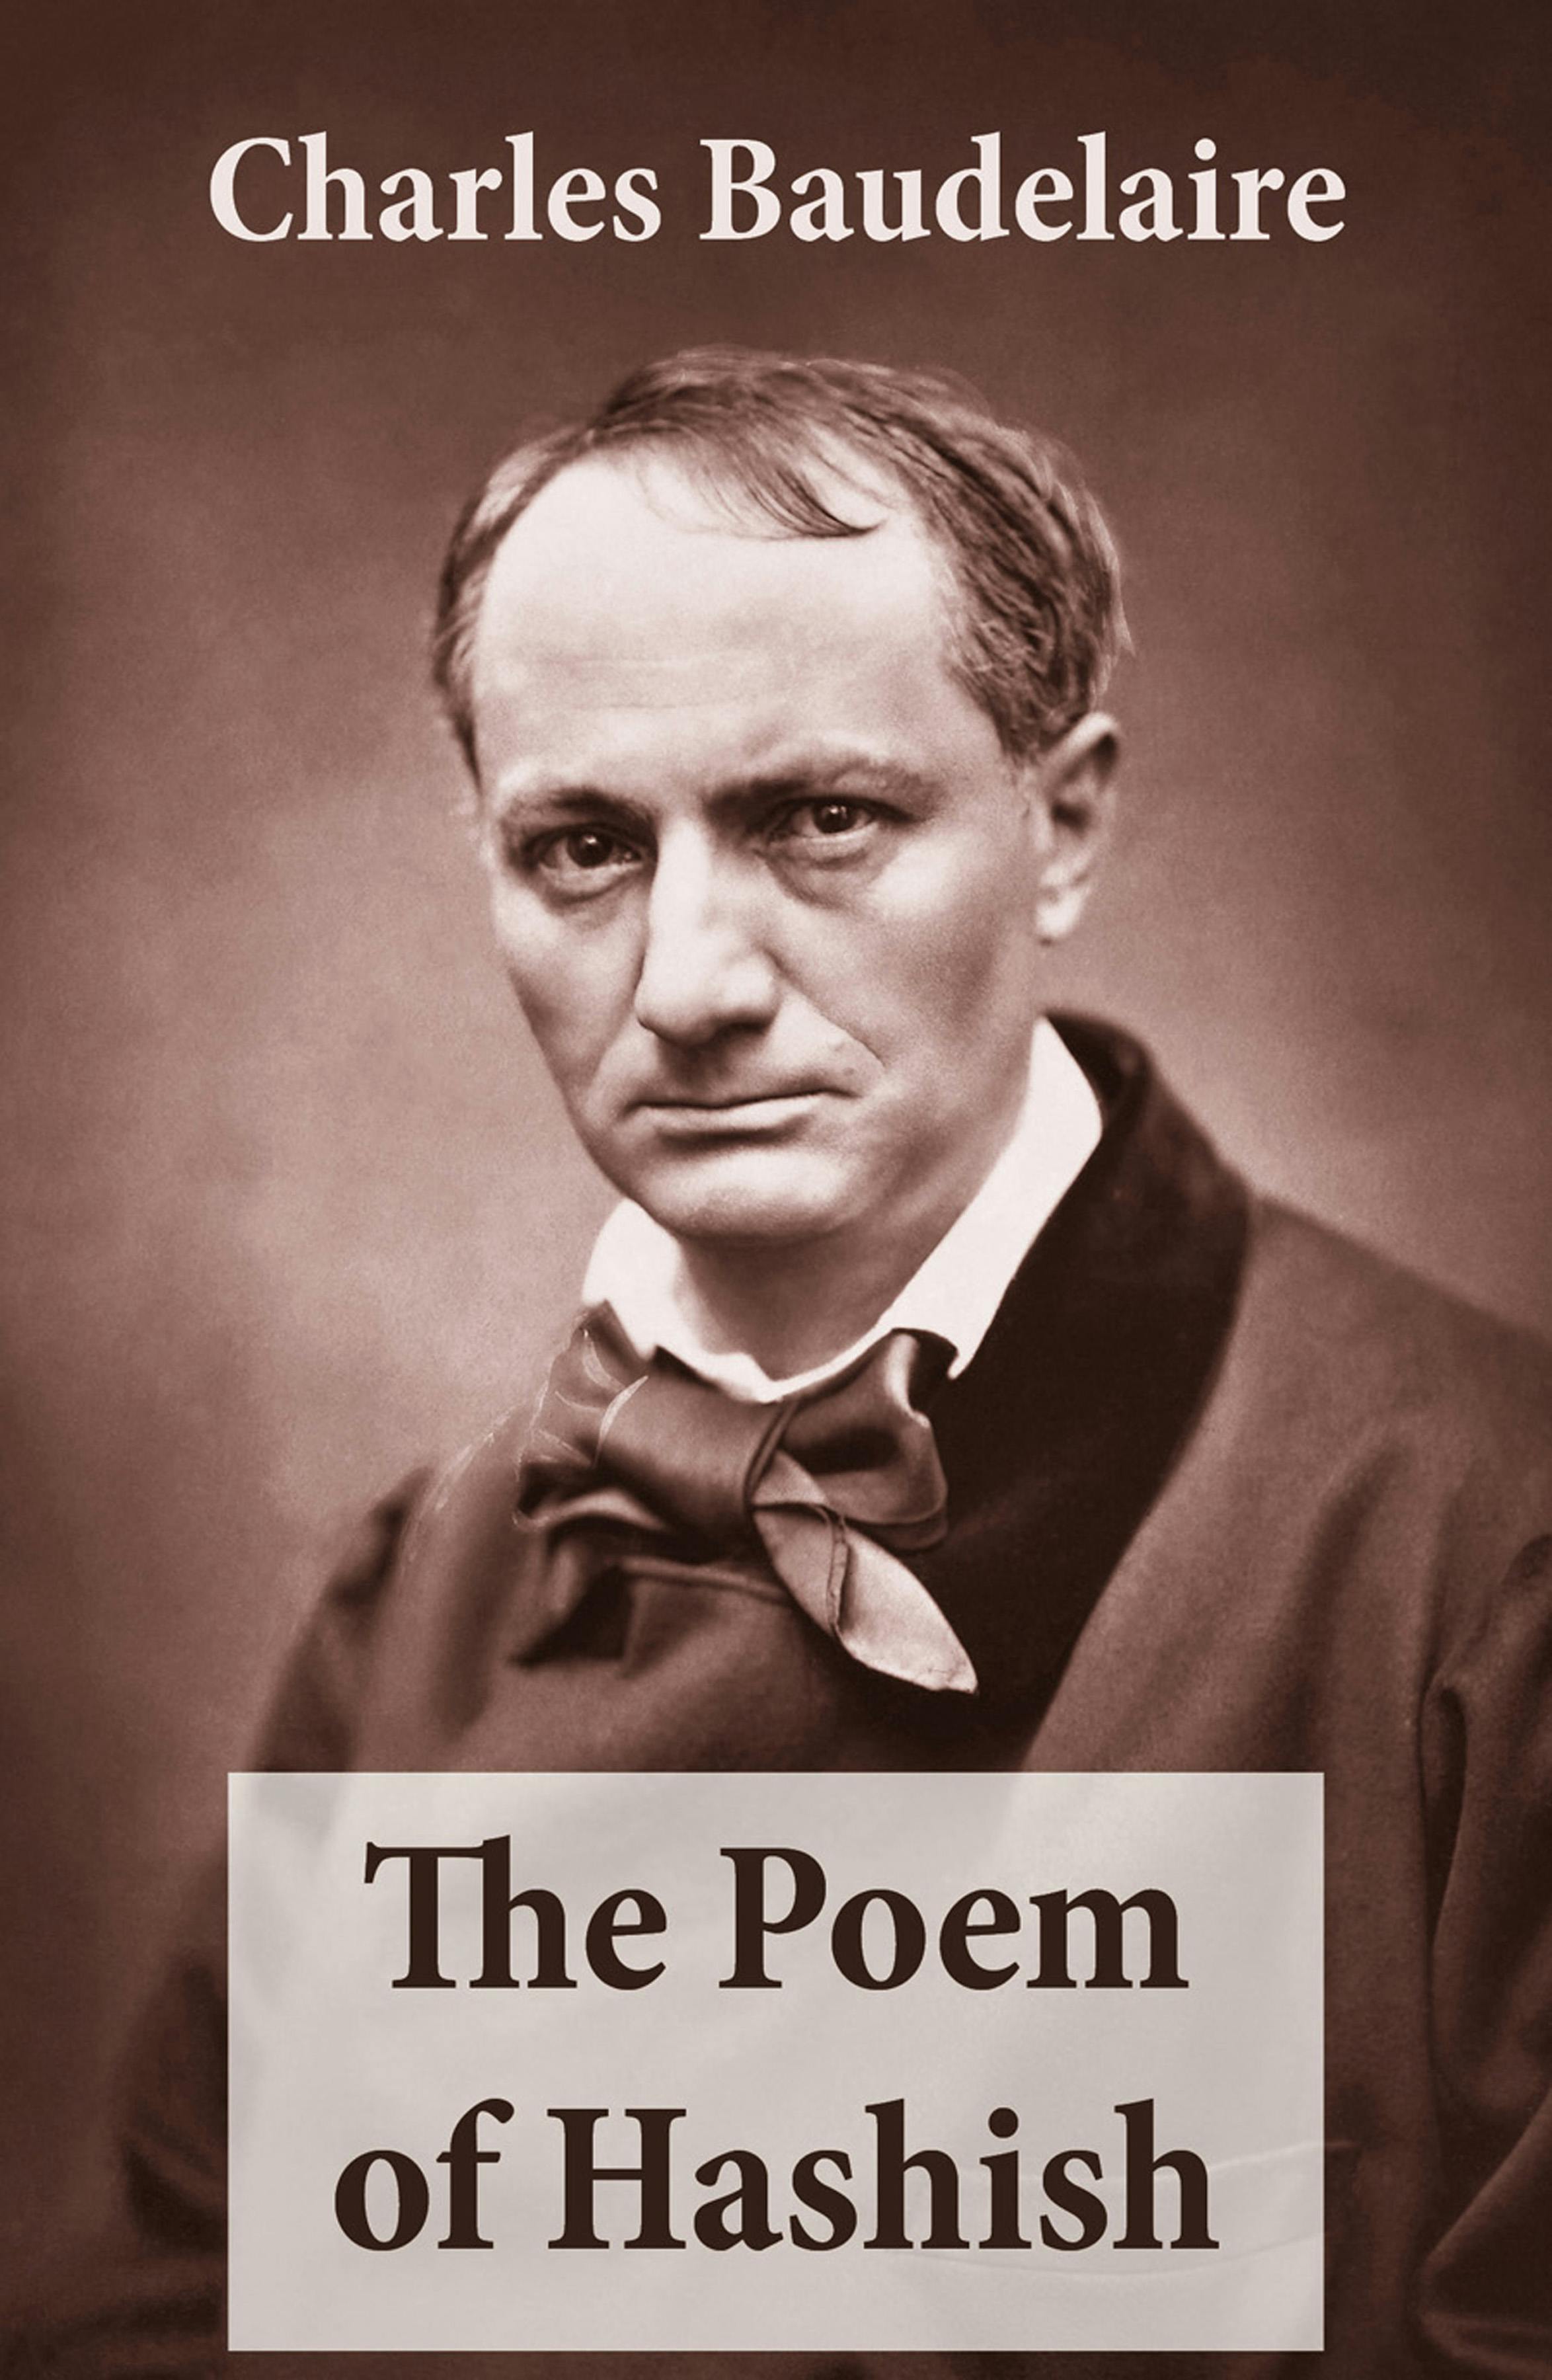 The Poem of Hashish (The Complete Essay translated by Aleister Crowley) - Charles Baudelaire, Aleister Crowley